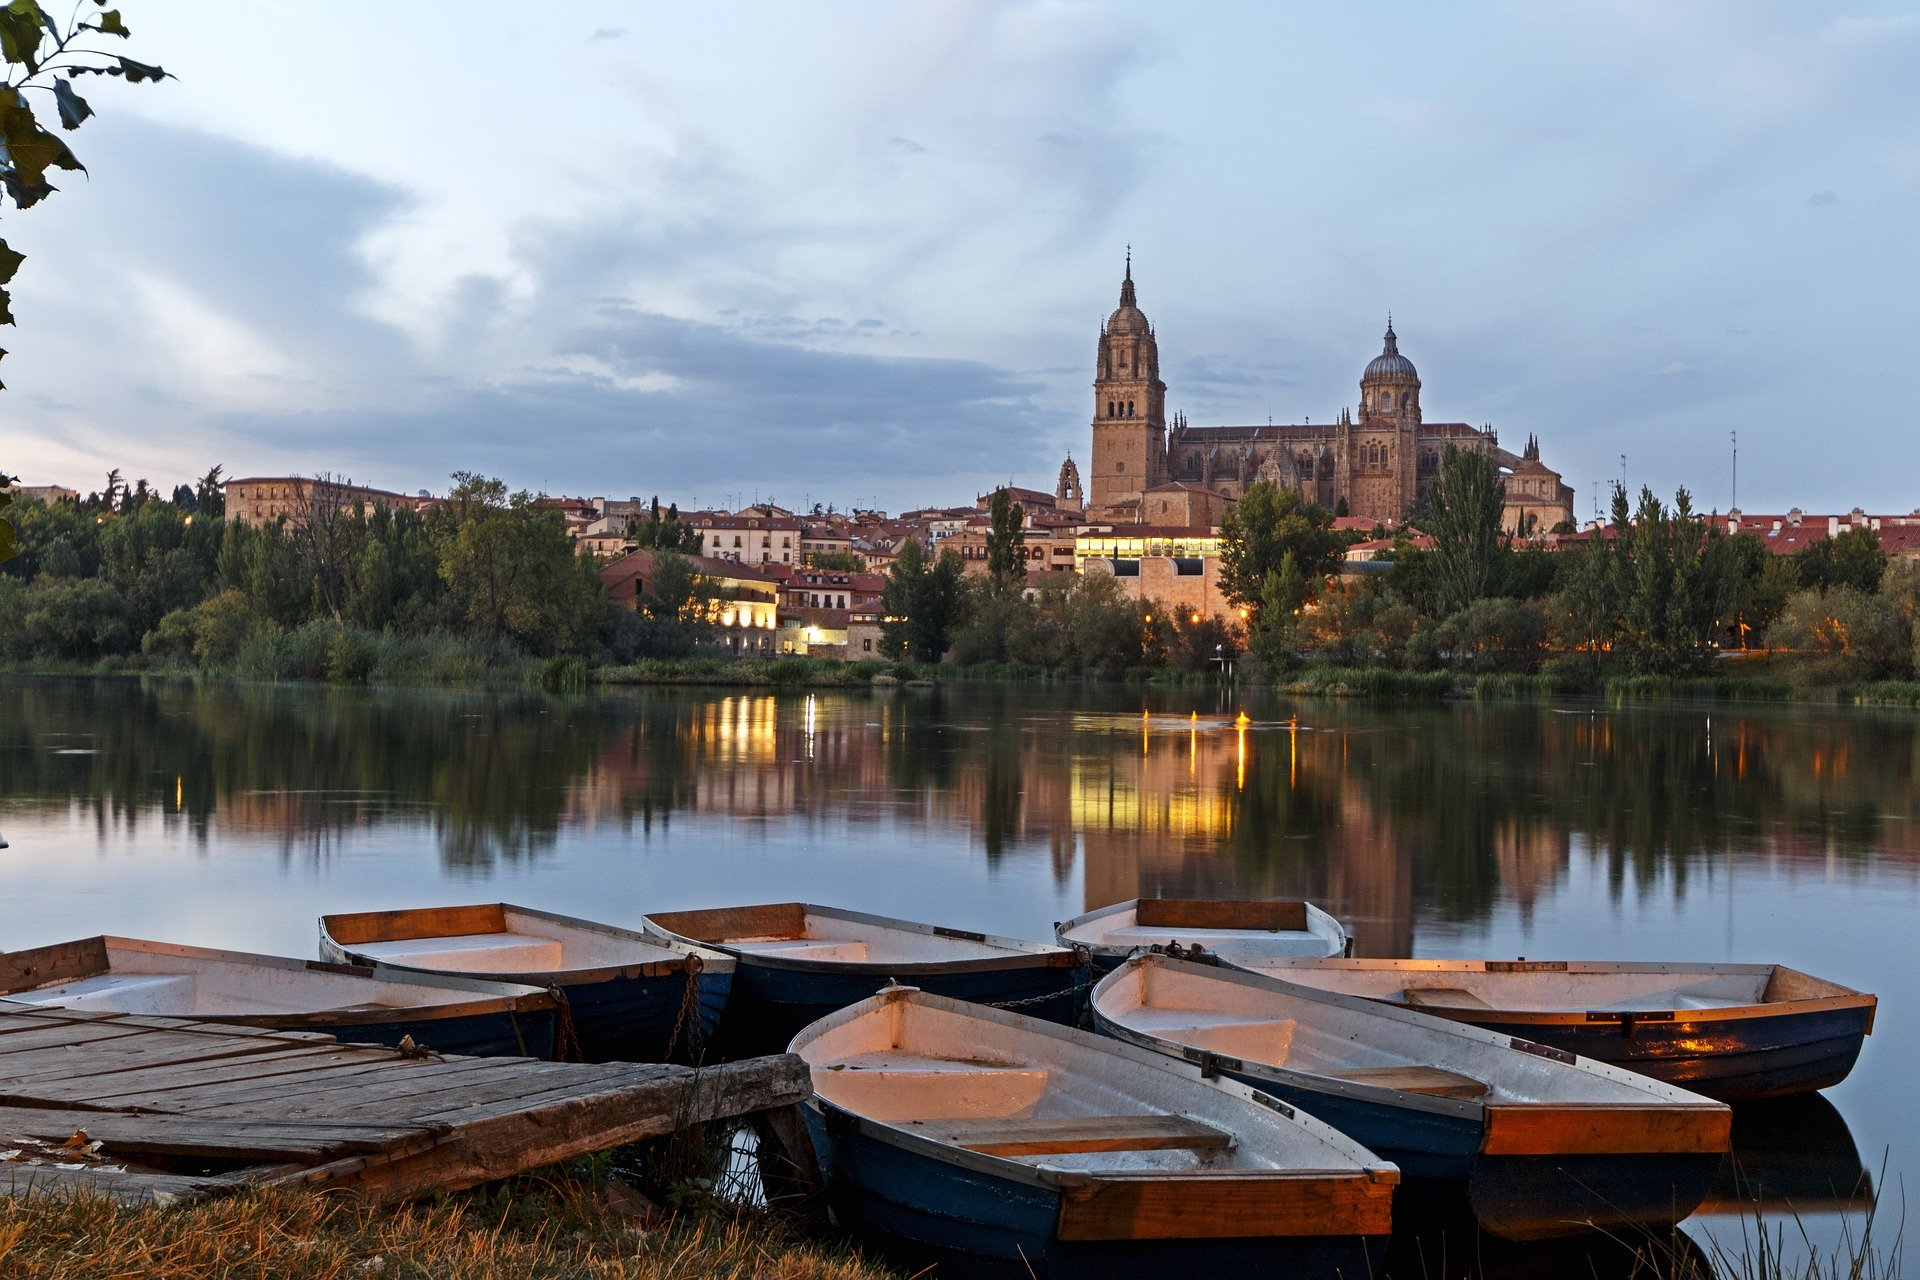 How To Get From Madrid Airport To Salamanca - All Possible Ways